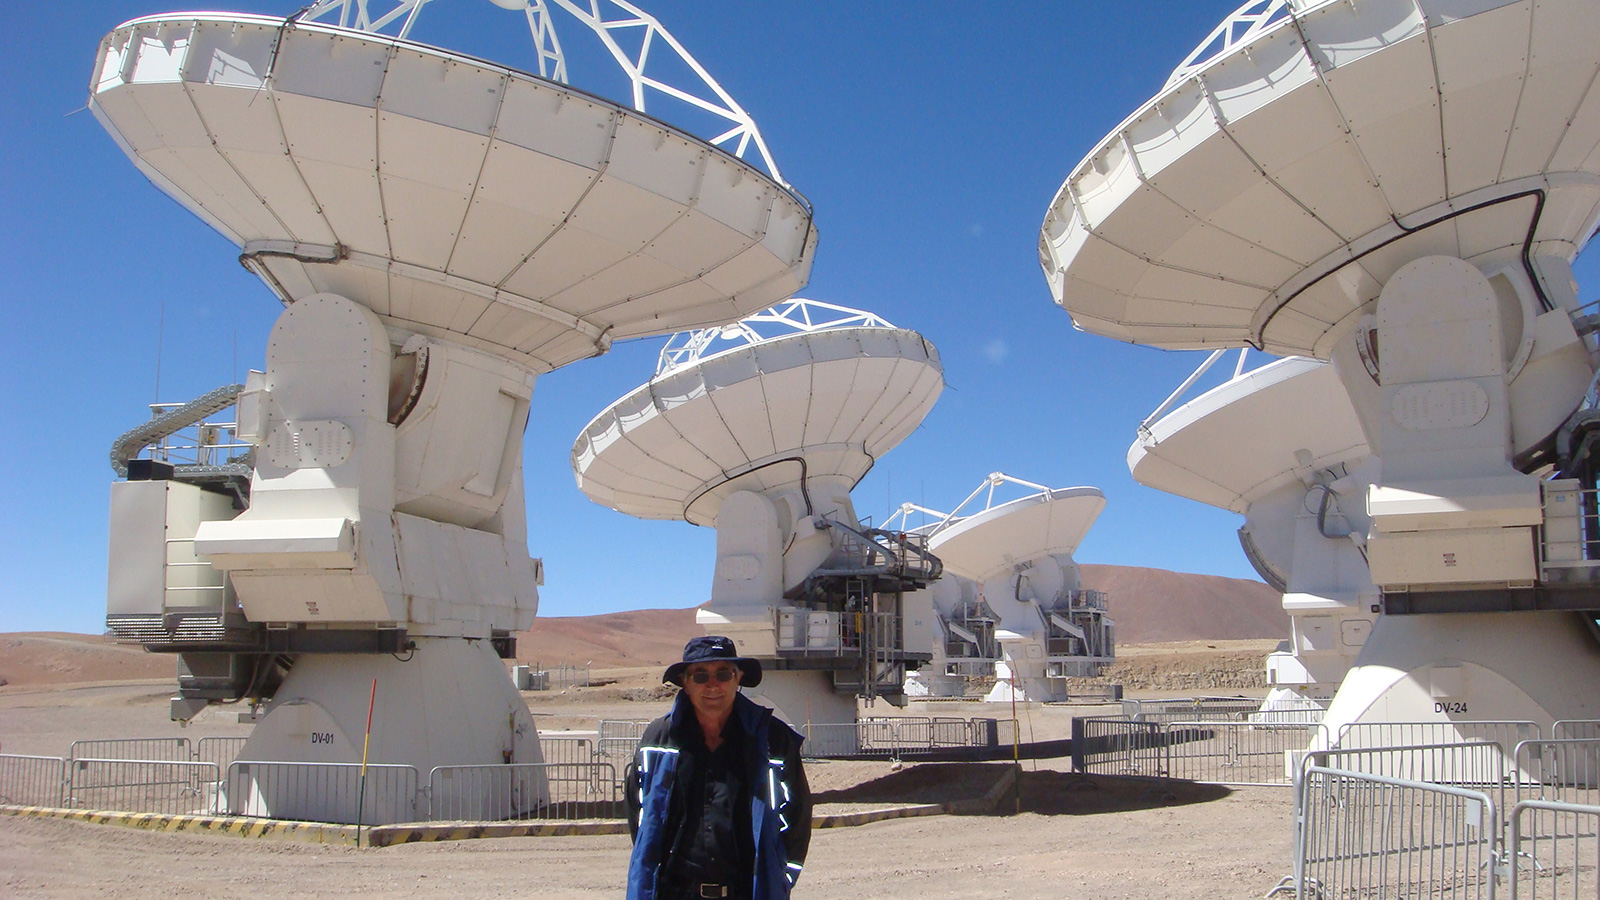 Paul Davies standing in front of an array of telescope antennas